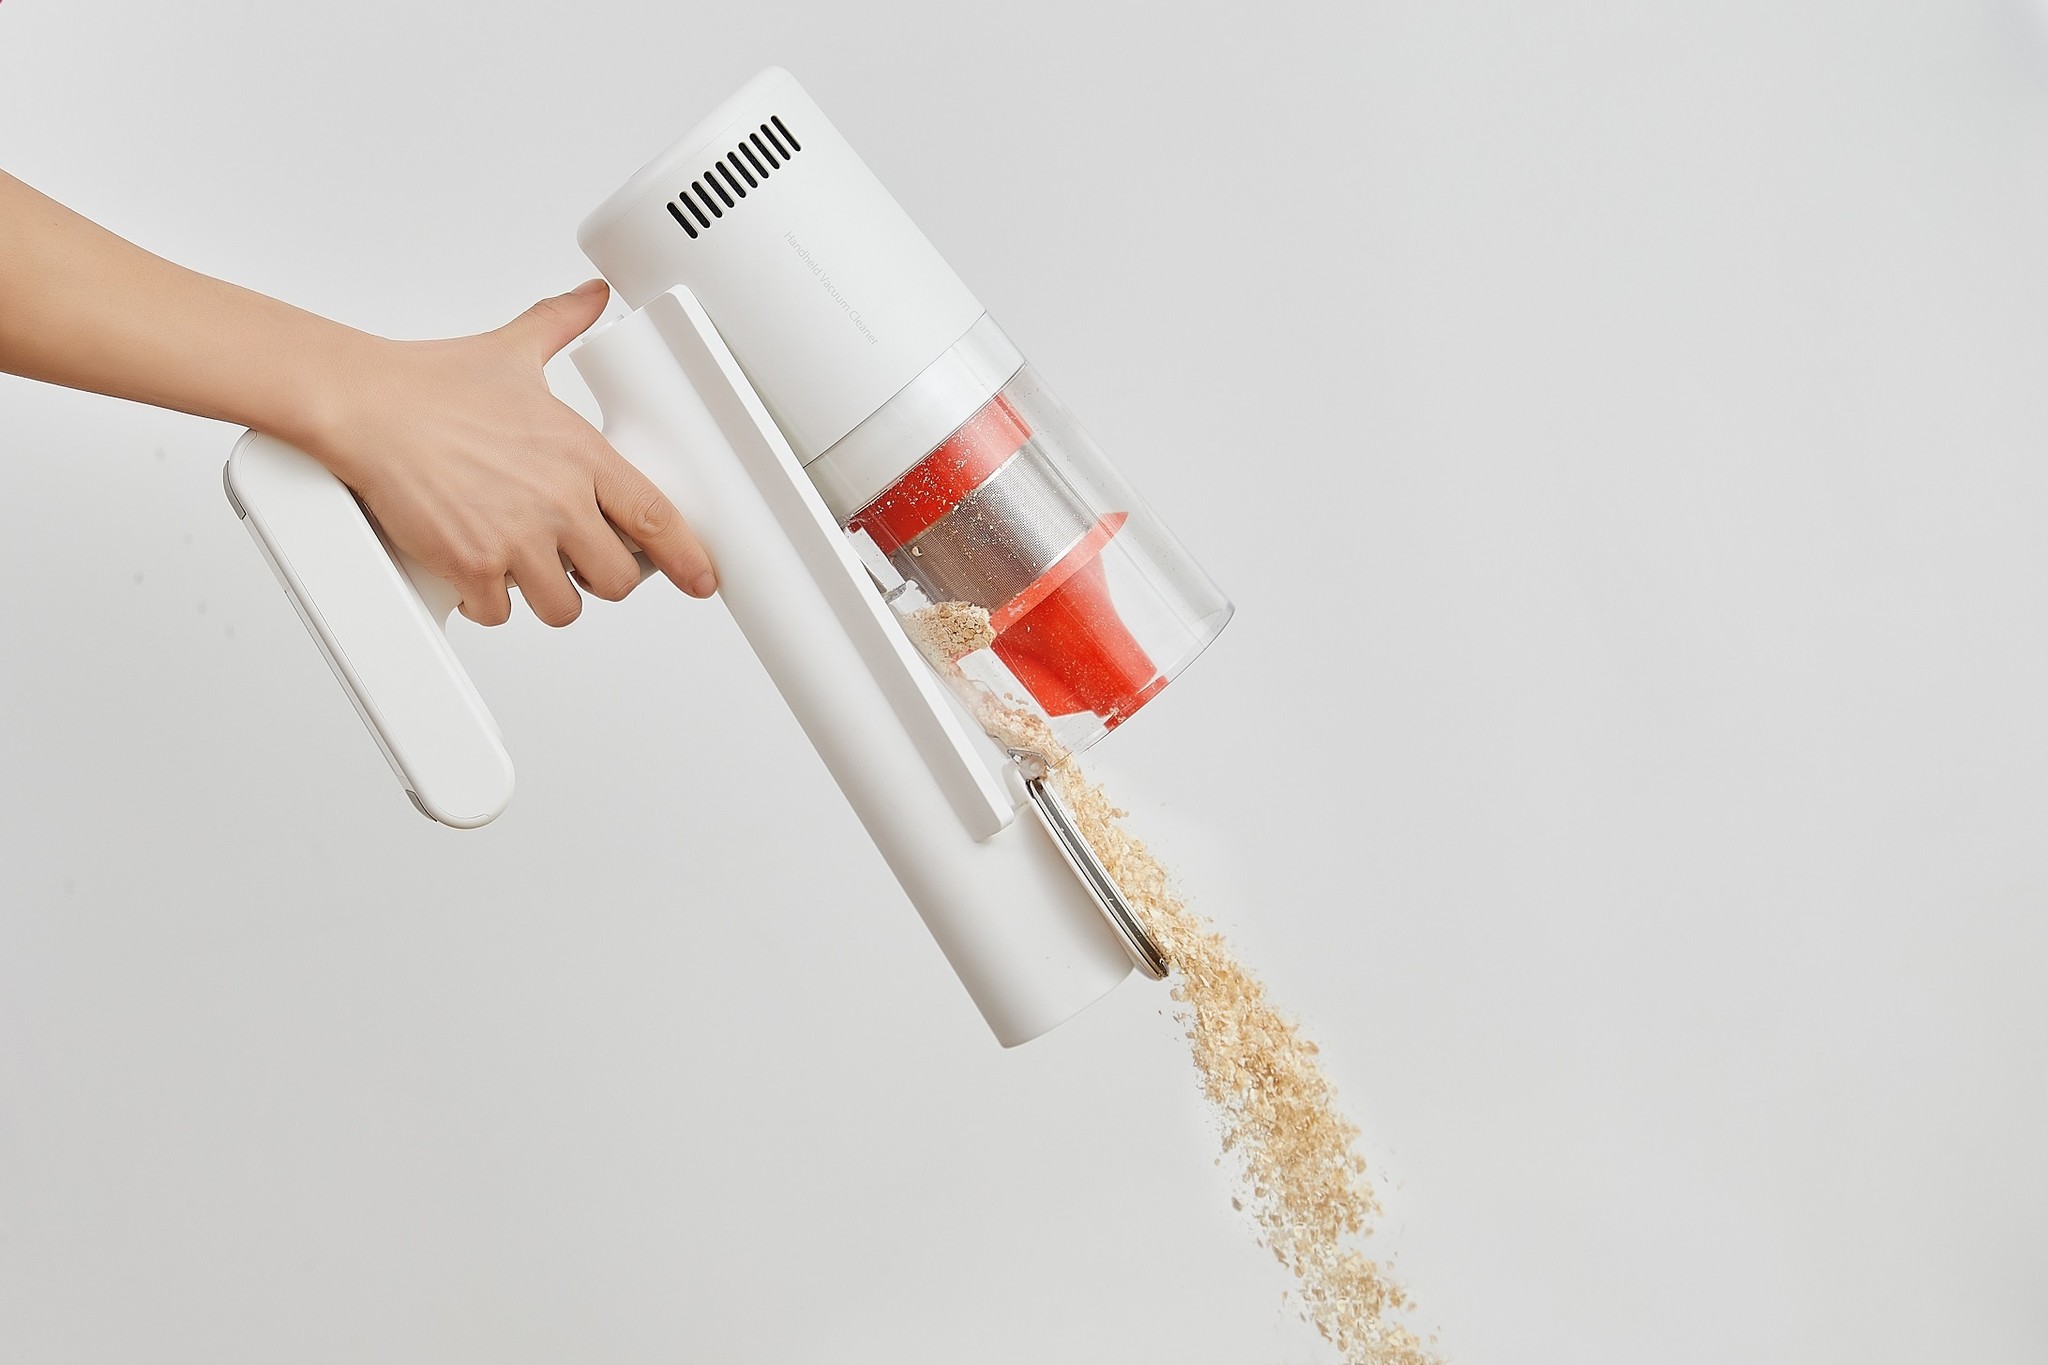 Xiaomi Vacuum Cleaner G11: New Face of The Cleaning Review 